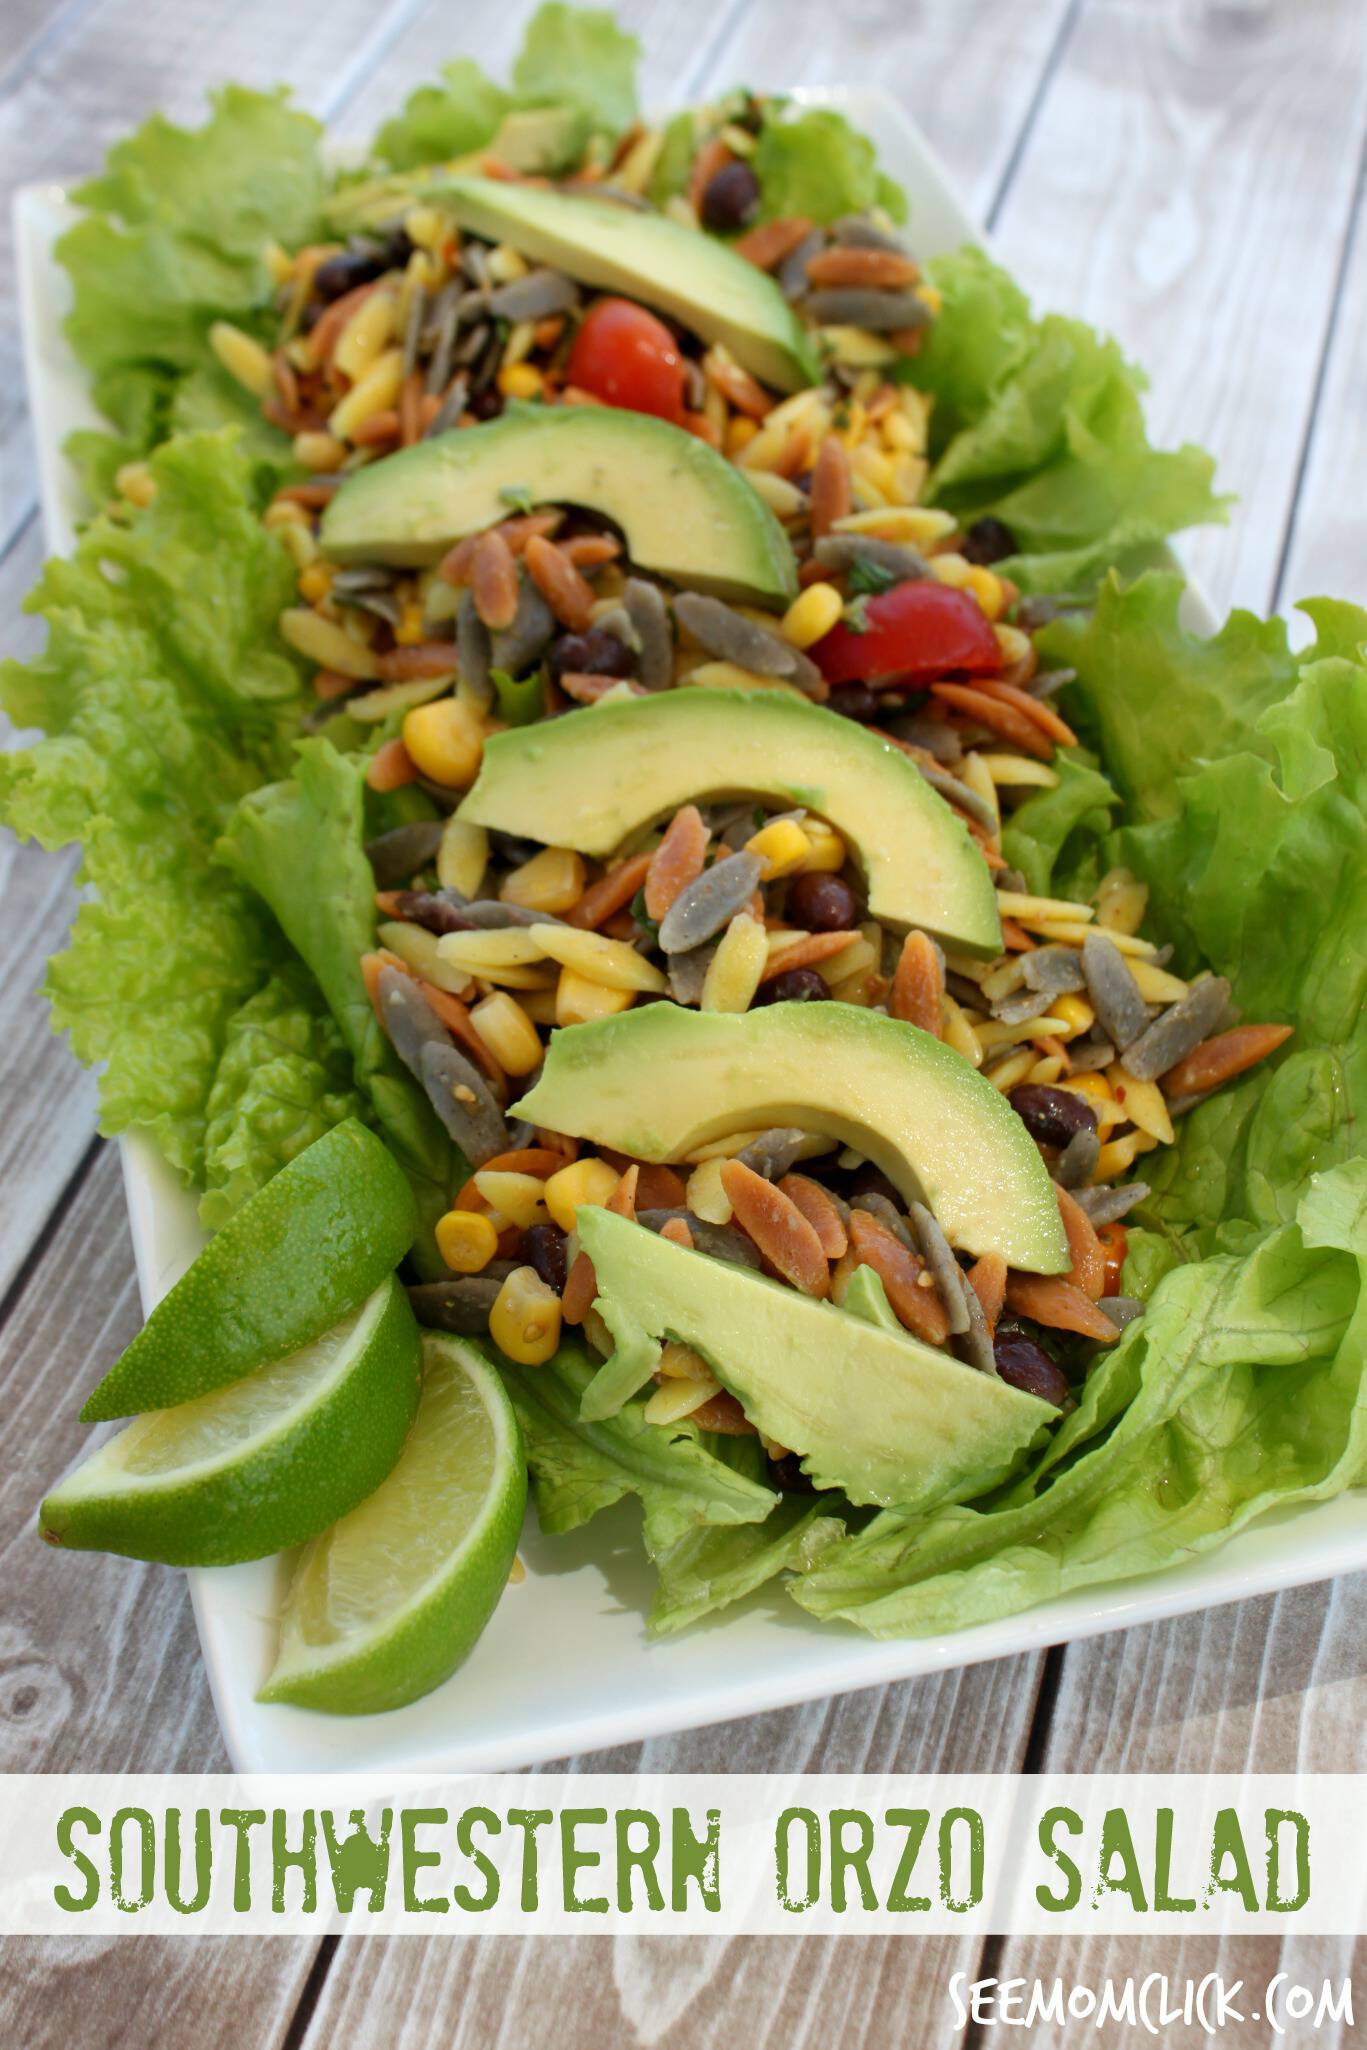 Jazz up your summer cookout side dishes with this Southwestern Orzo Salad. Fresh, fast, and delicious, it's sure to be a hit. It's almost too pretty to eat. (Almost!)